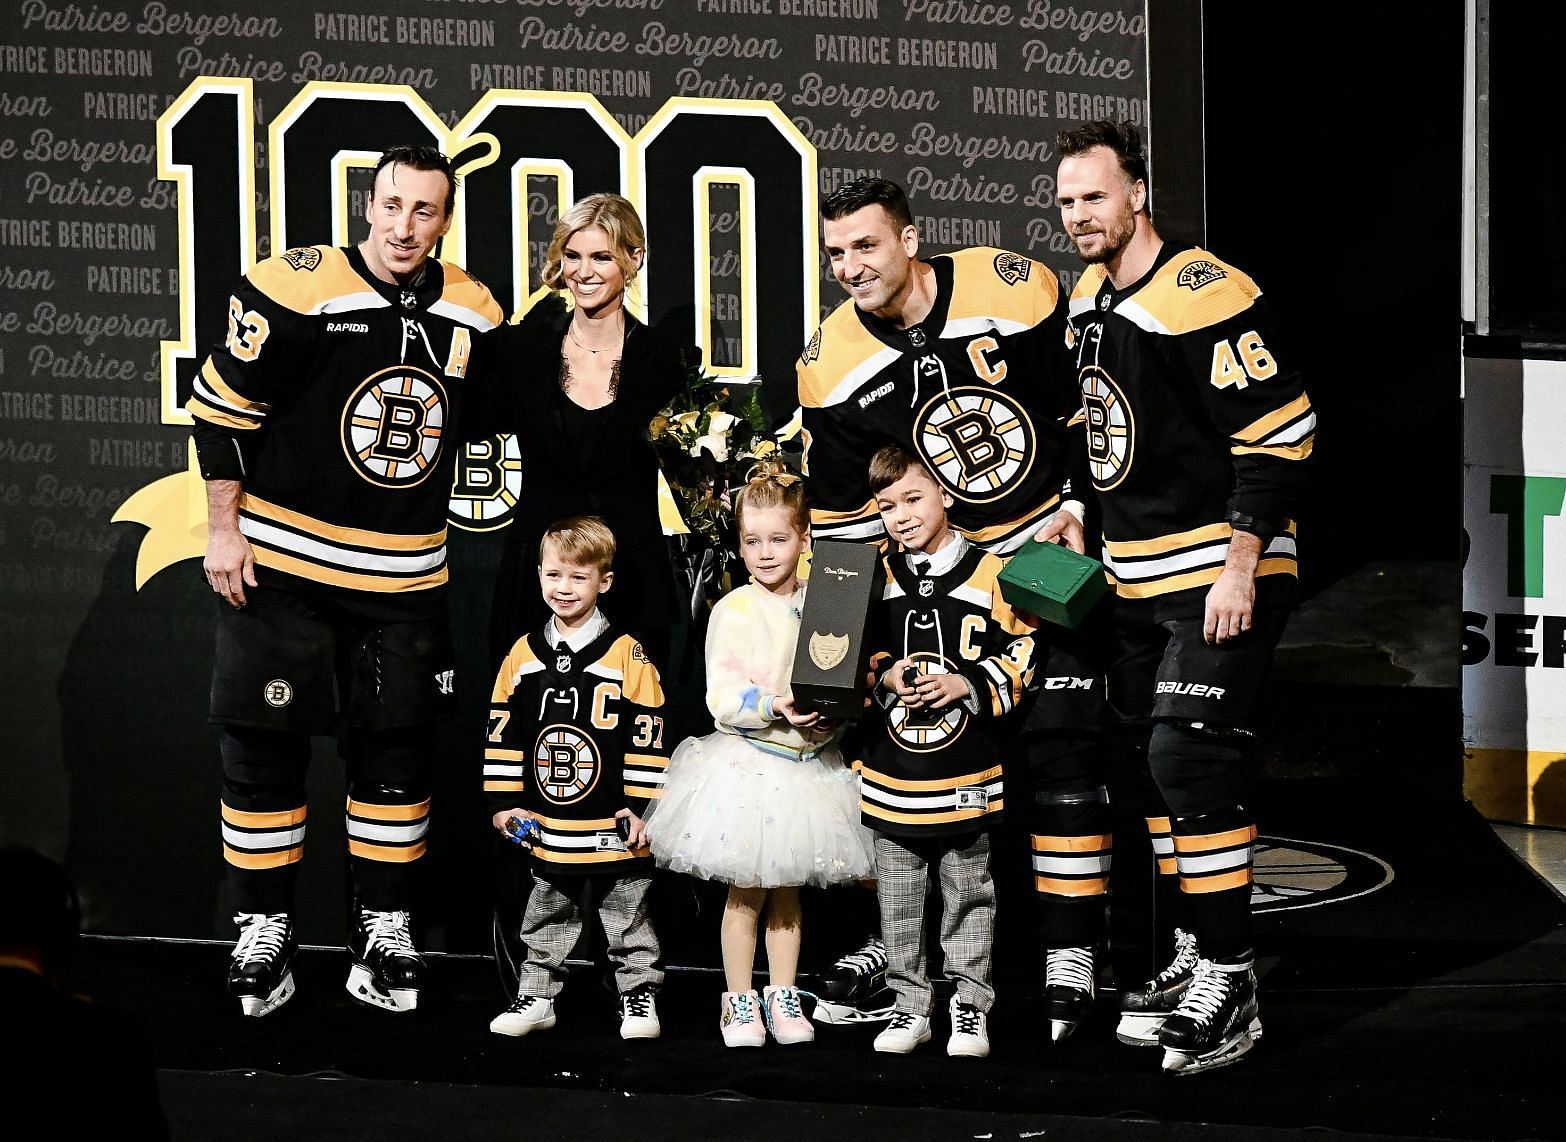 Patrice Bergeron, his wife, and children.